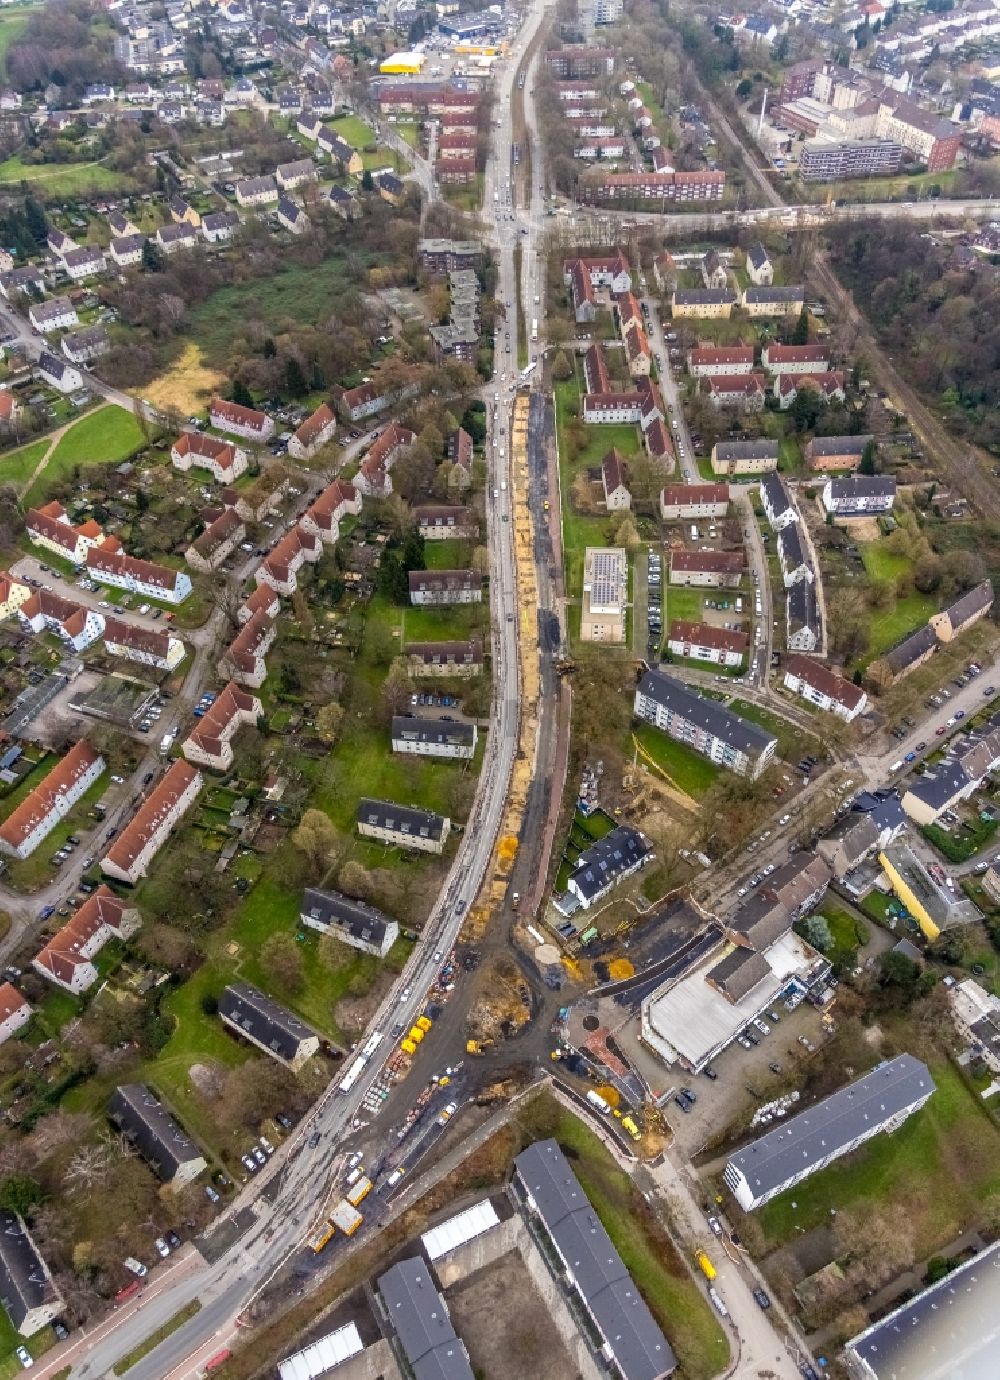 Gladbeck from the bird's eye view: Construction site to remodel the course of the intersection on Wiesmannstrasse - Breukerstrasse - Horster Strasse in the district Brauck in Gladbeck at Ruhrgebiet in the state North Rhine-Westphalia, Germany